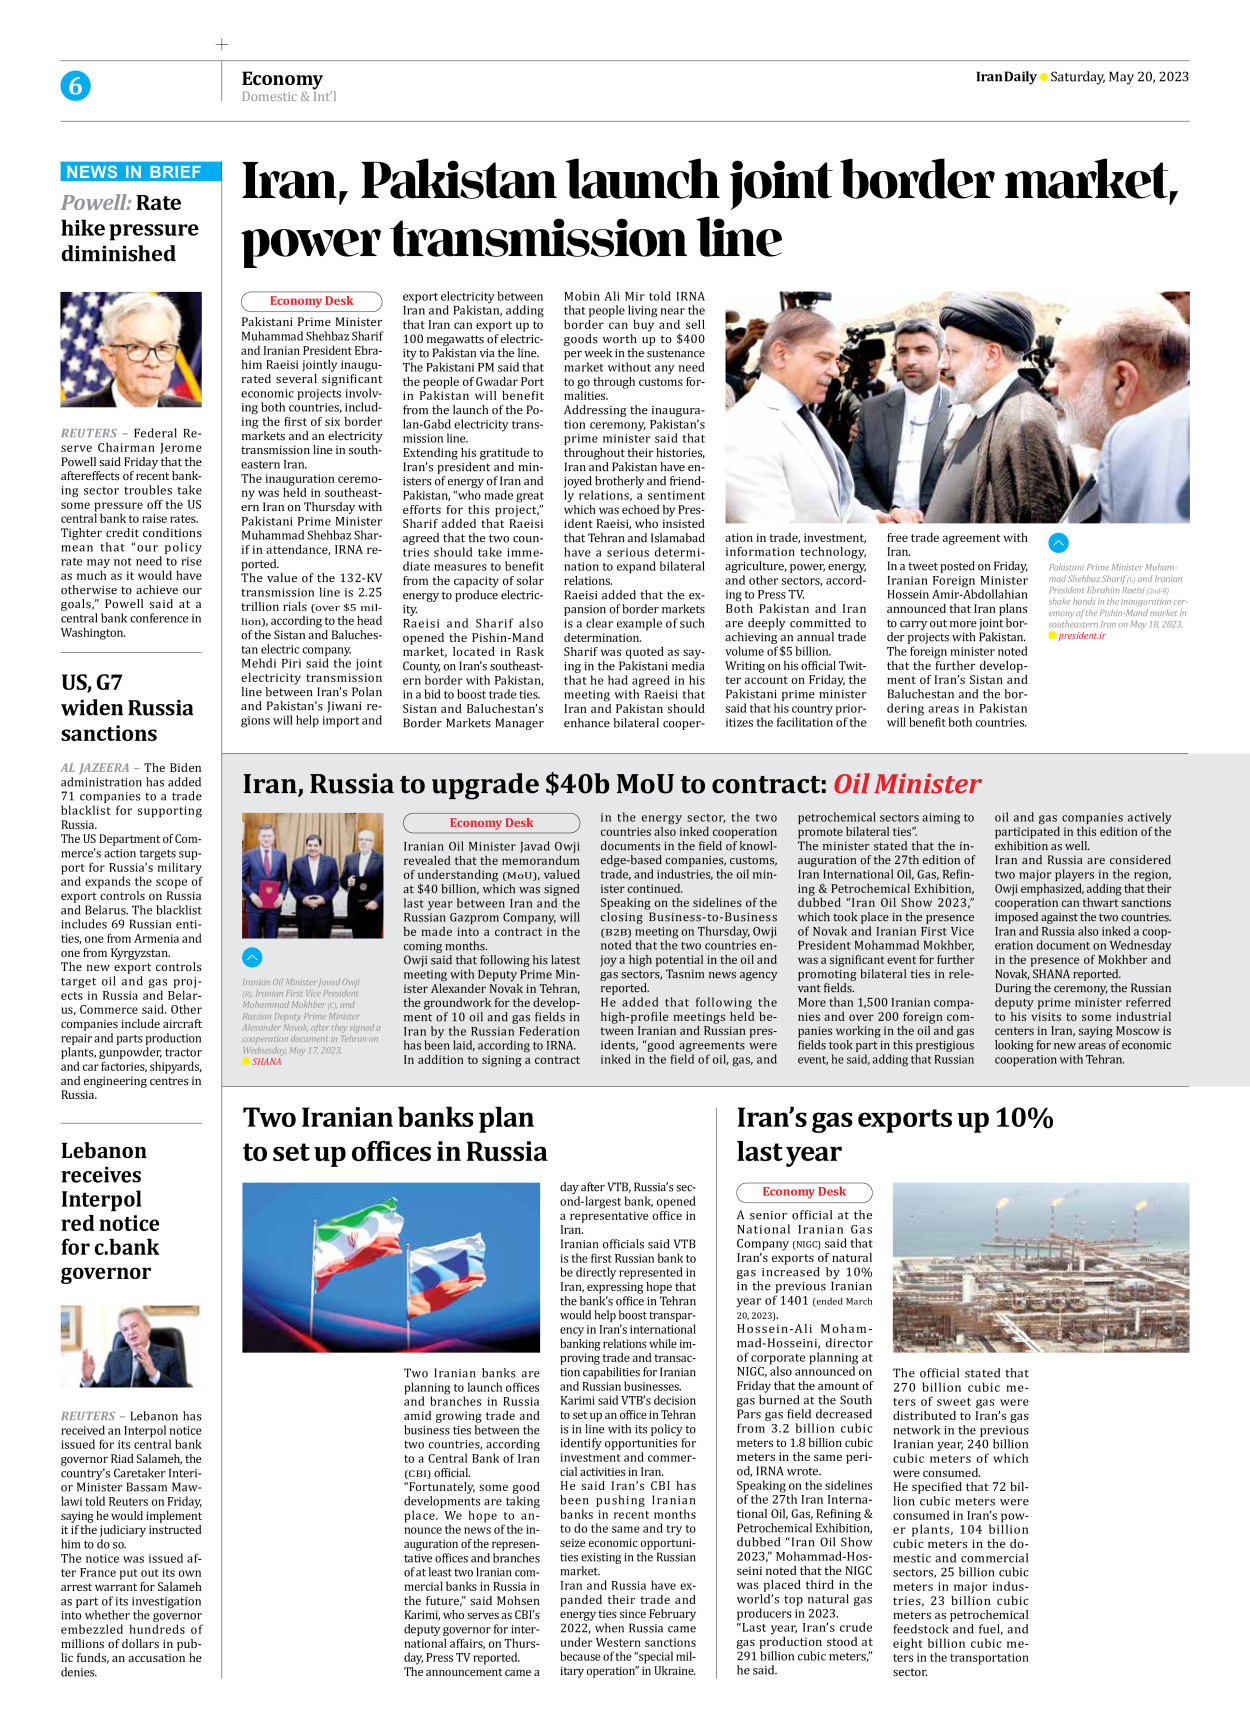 Iran Daily - Number Seven Thousand Two Hundred and Ninety Five - 20 May 2023 - Page 6